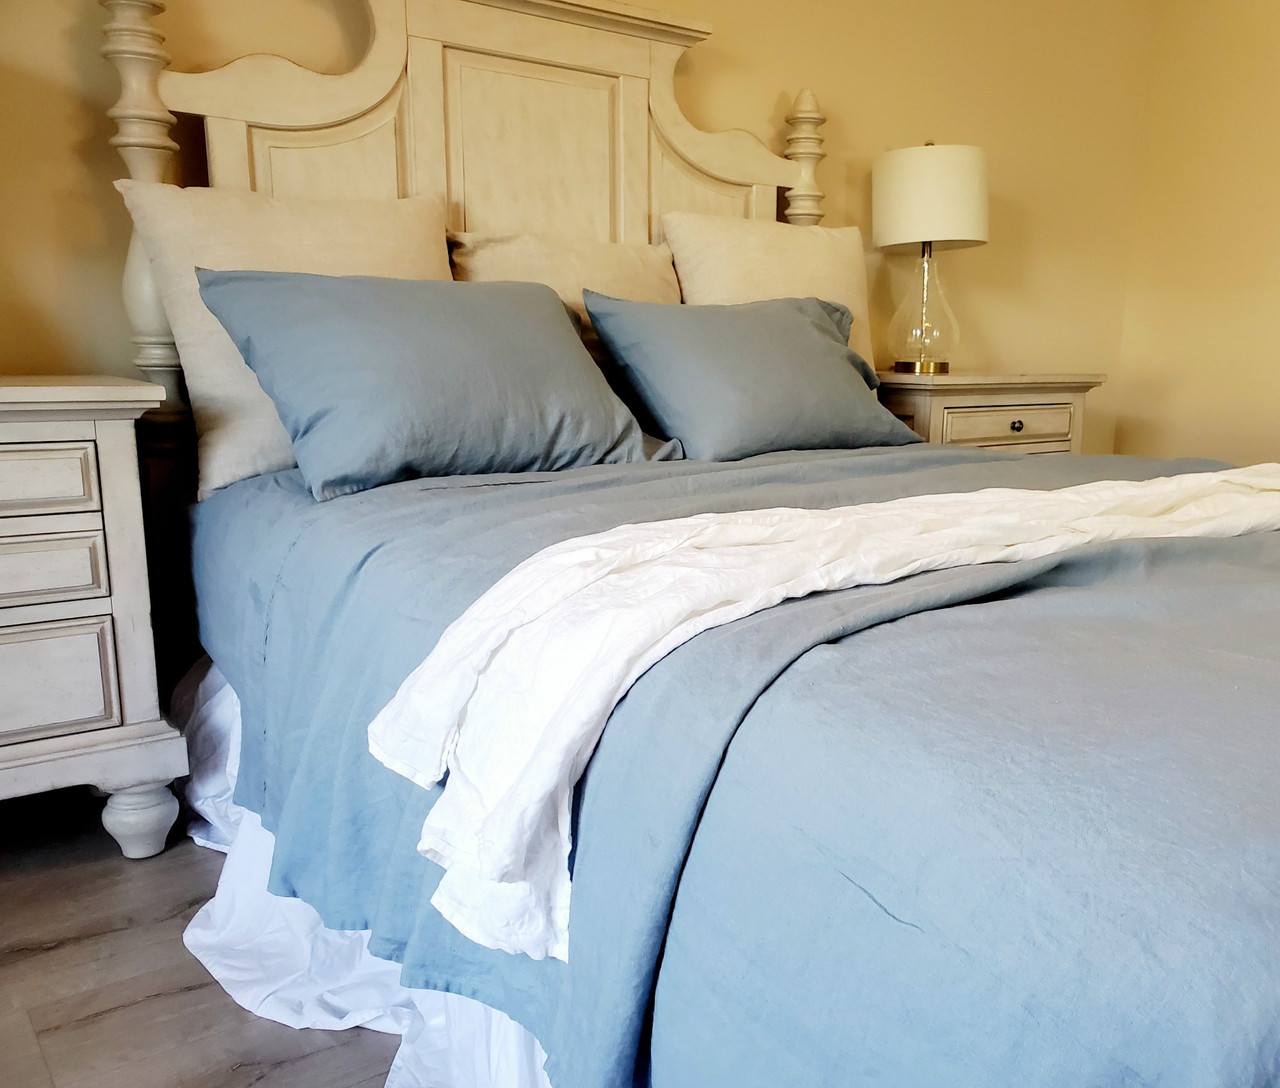 Dusty Blue Linen Sheets Set Handcrafted By Superior Custom Linens